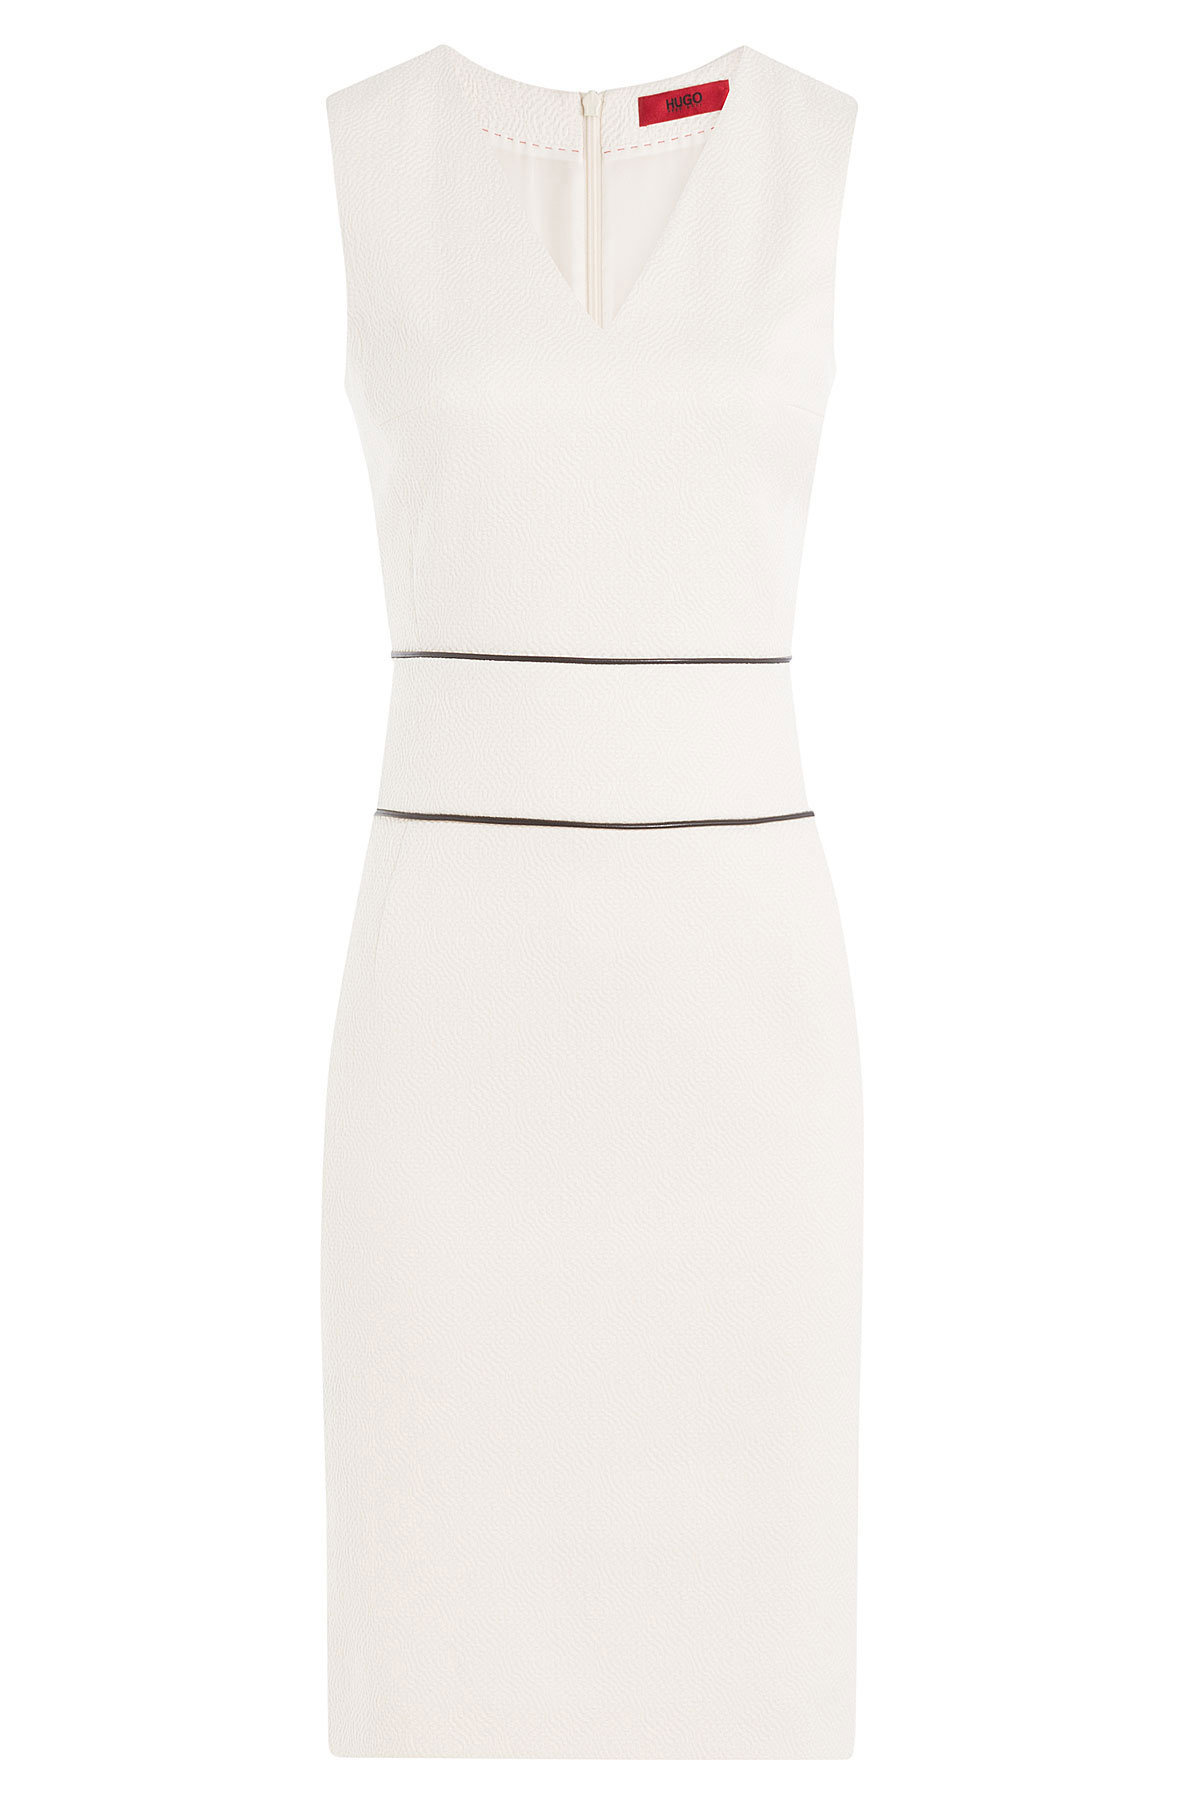 Tailored Dress with Cotton by Hugo